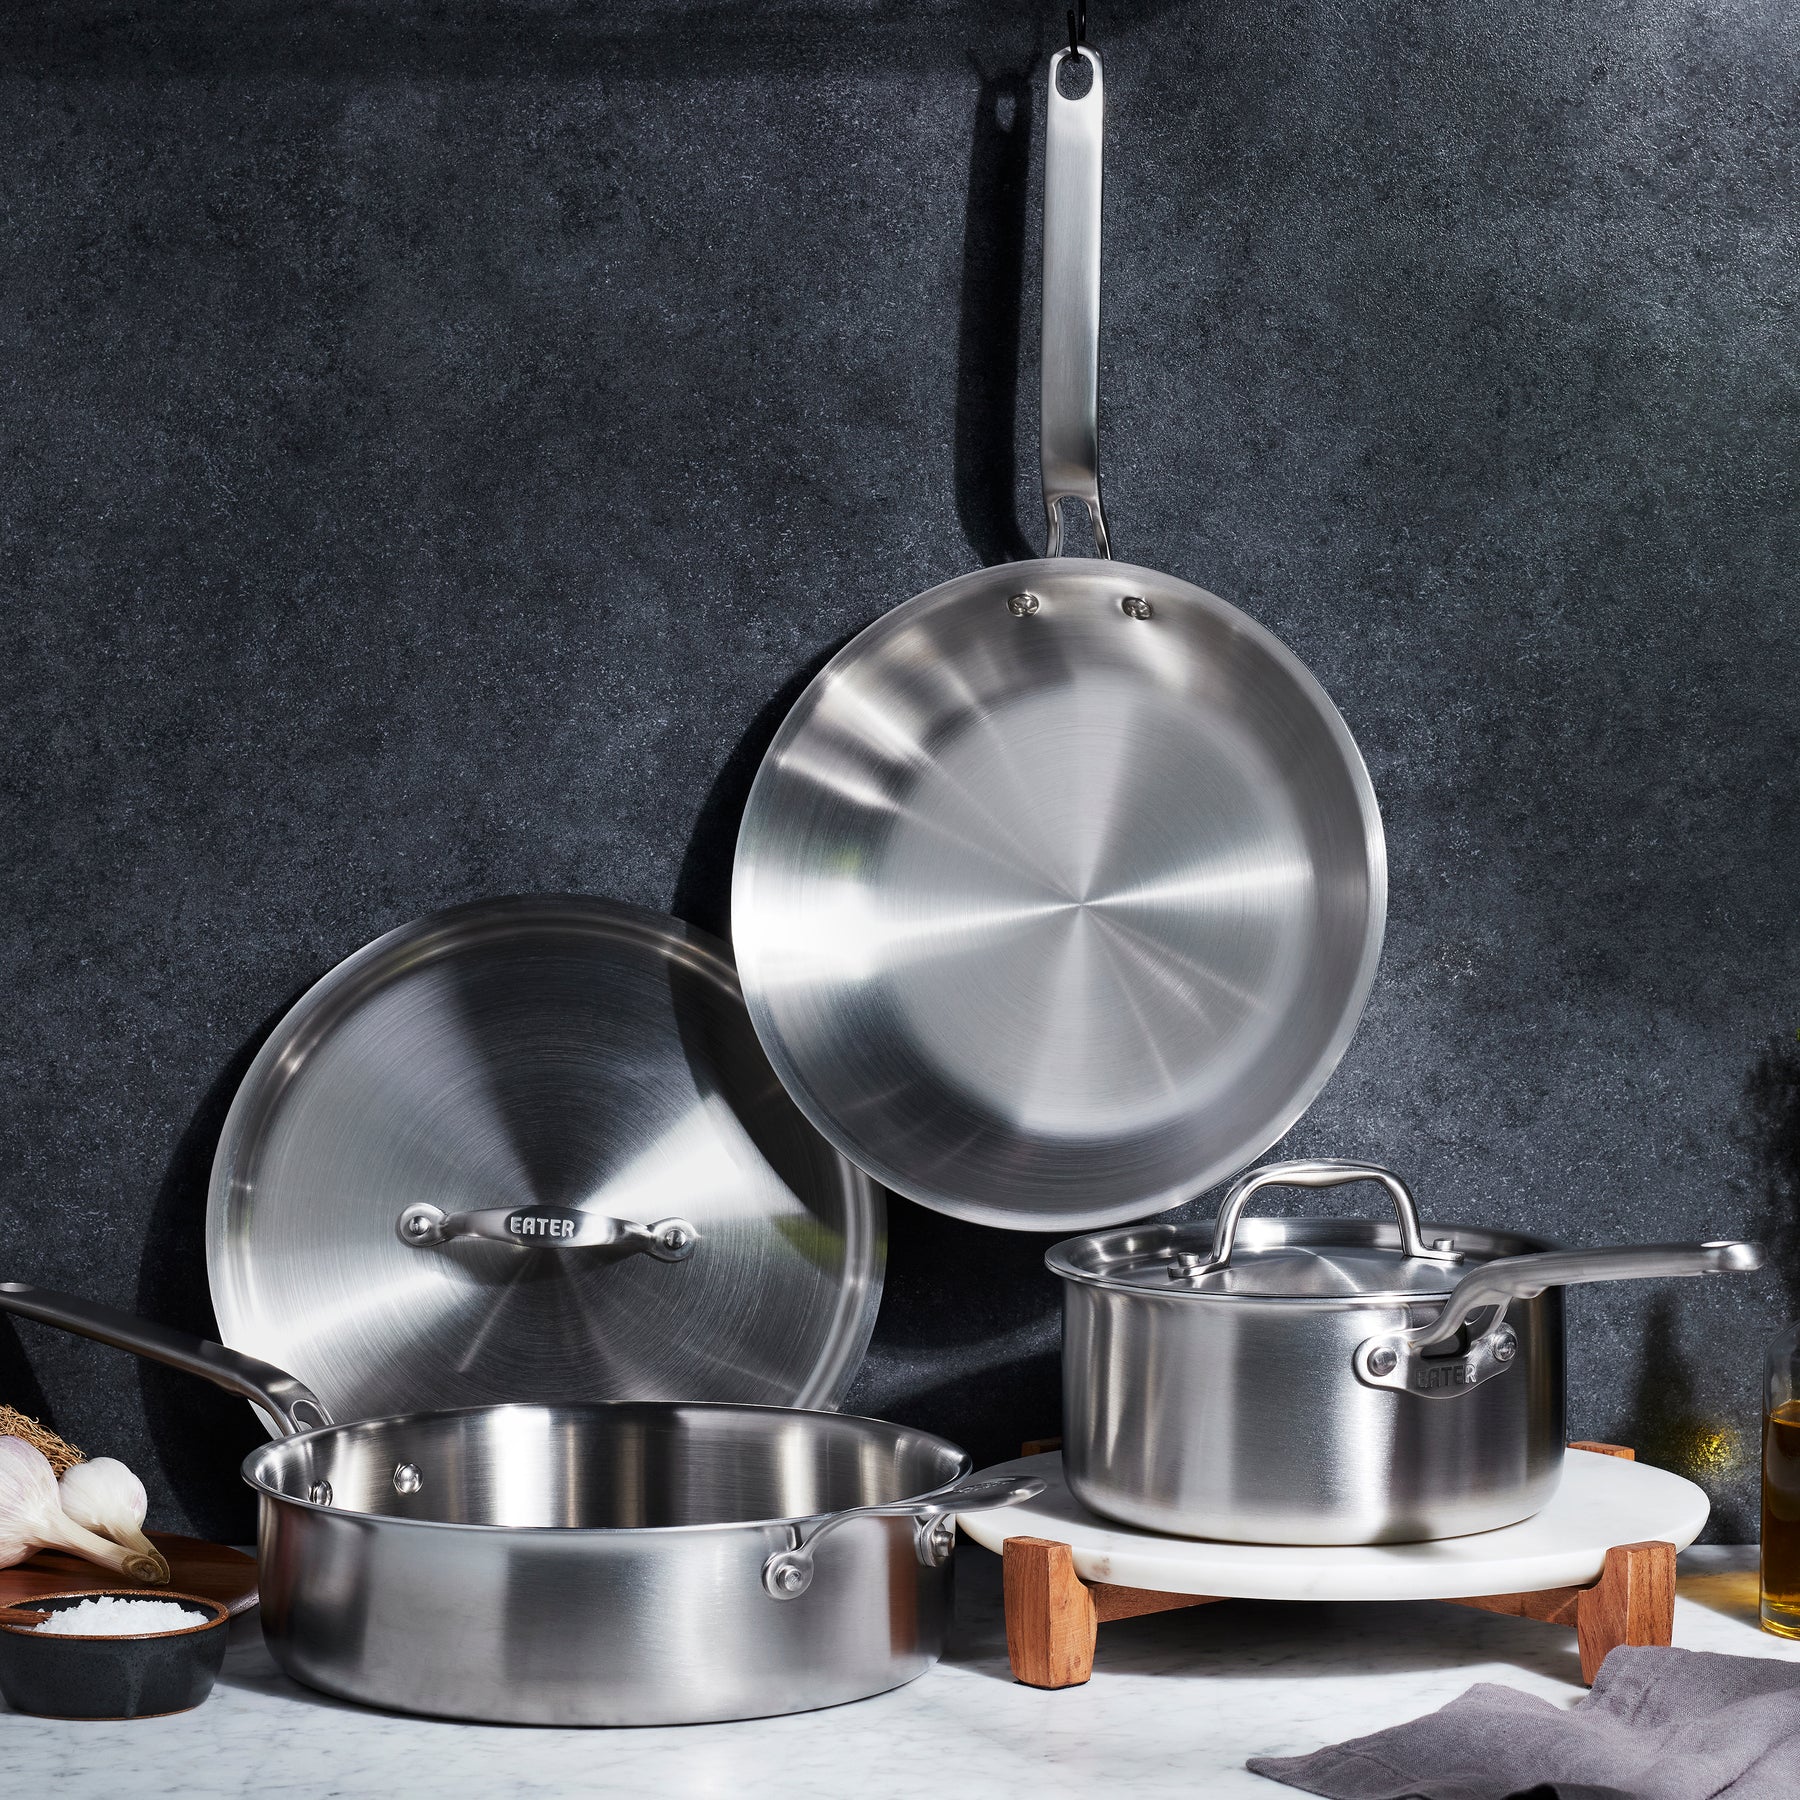 Heritage Steel Cookware Review (Is It Worth Buying?) - Prudent Reviews